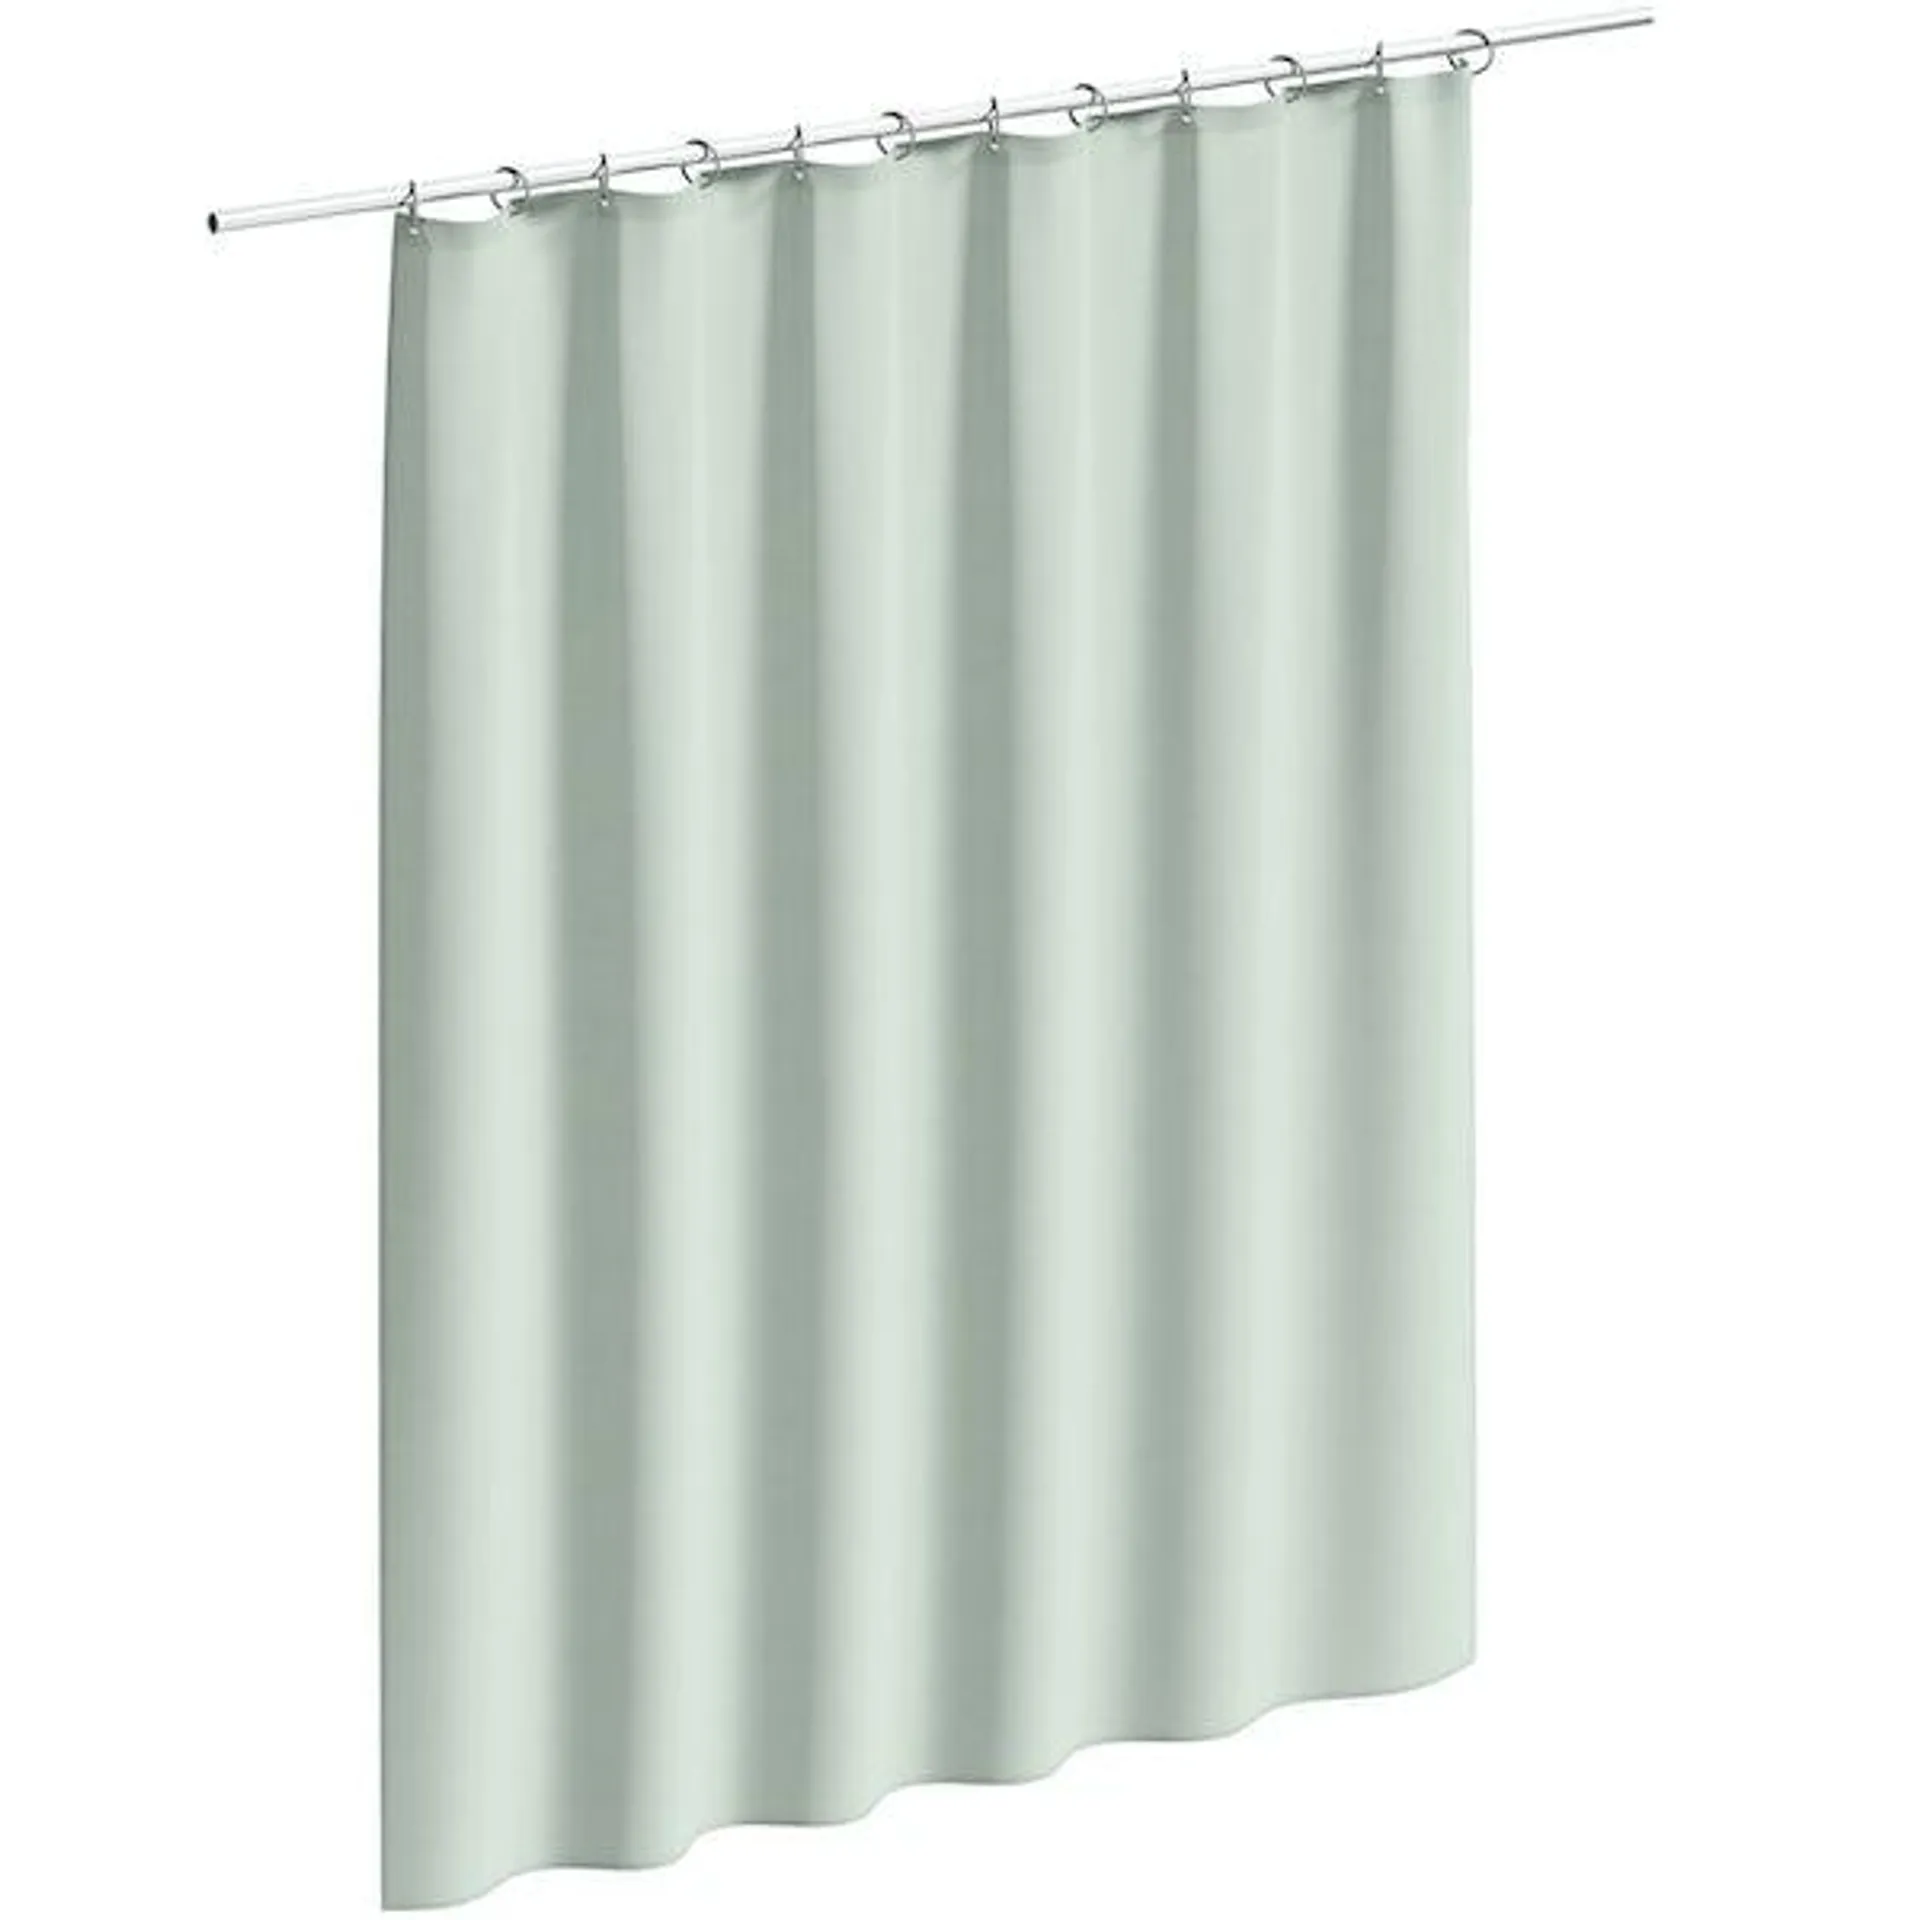 Accents grey shower curtain